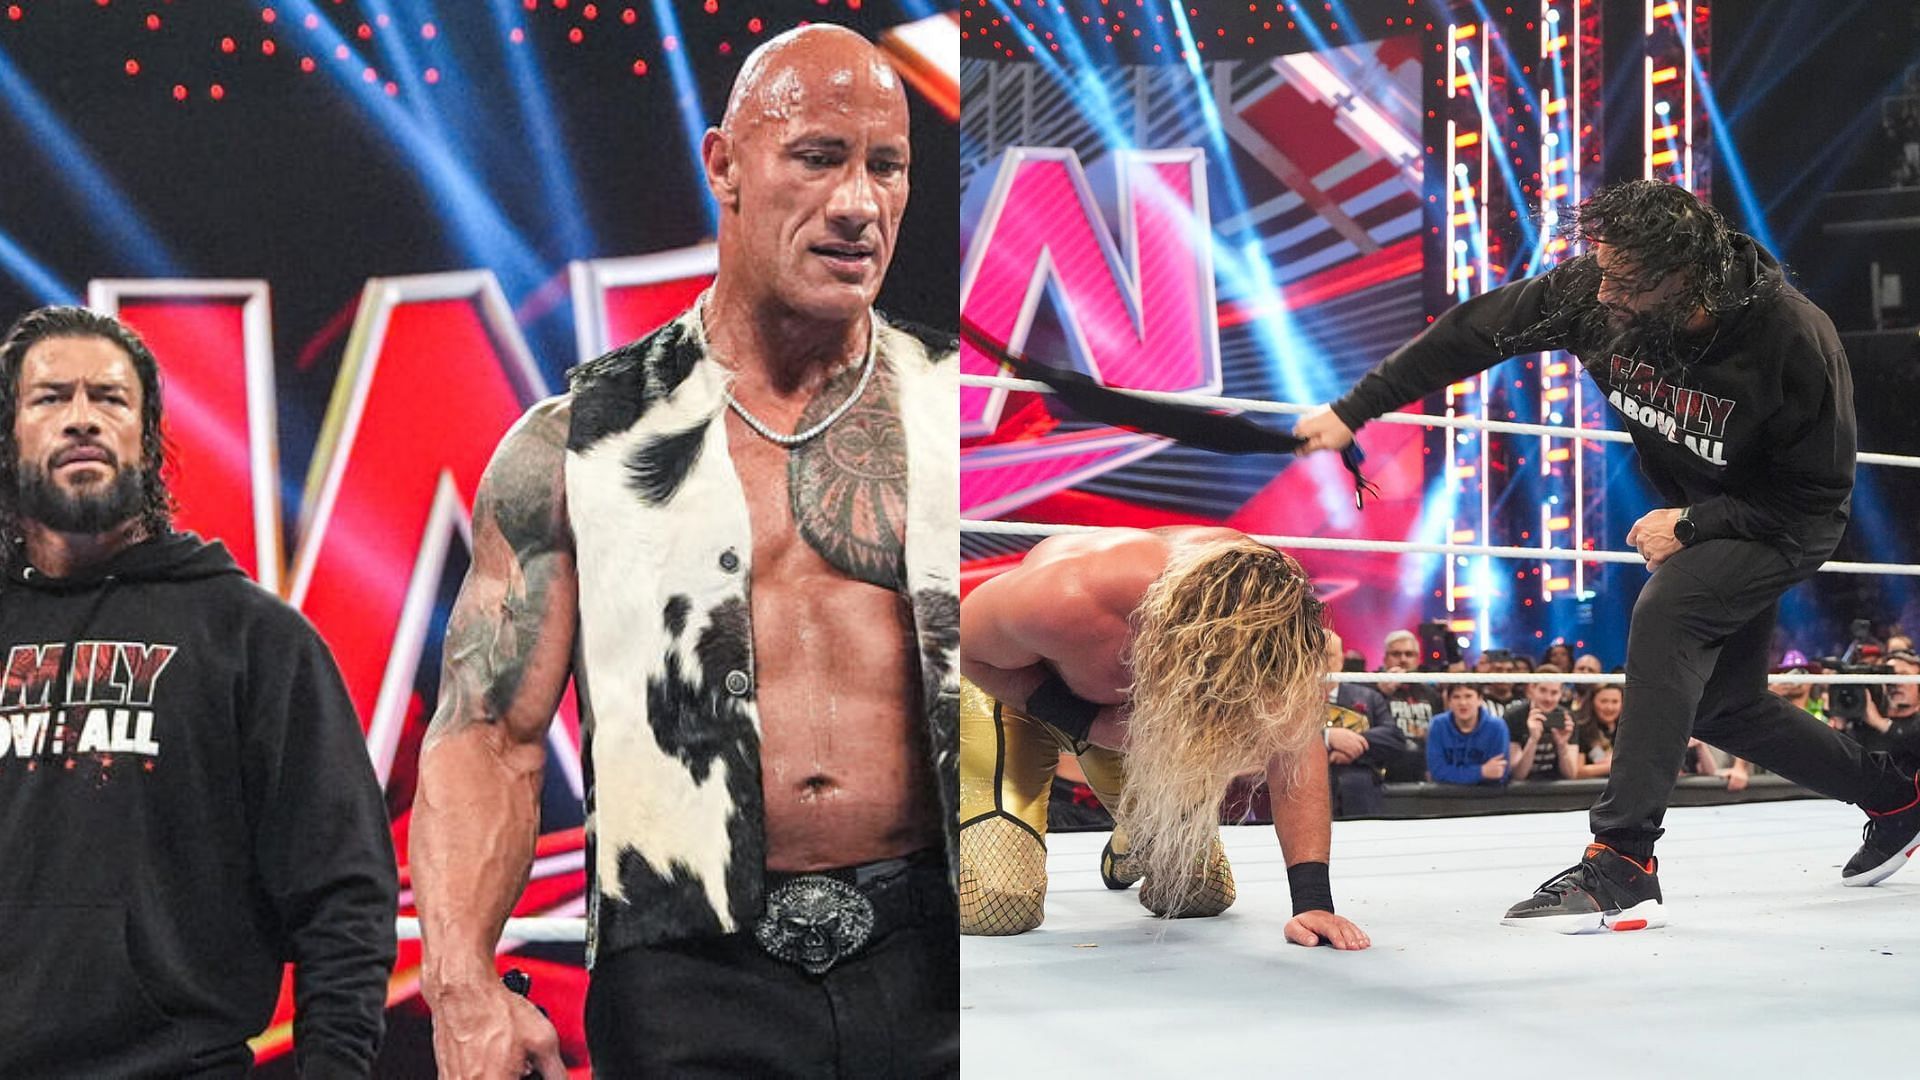 The Rock and Roman Reigns stood tall during the closing moments of RAW